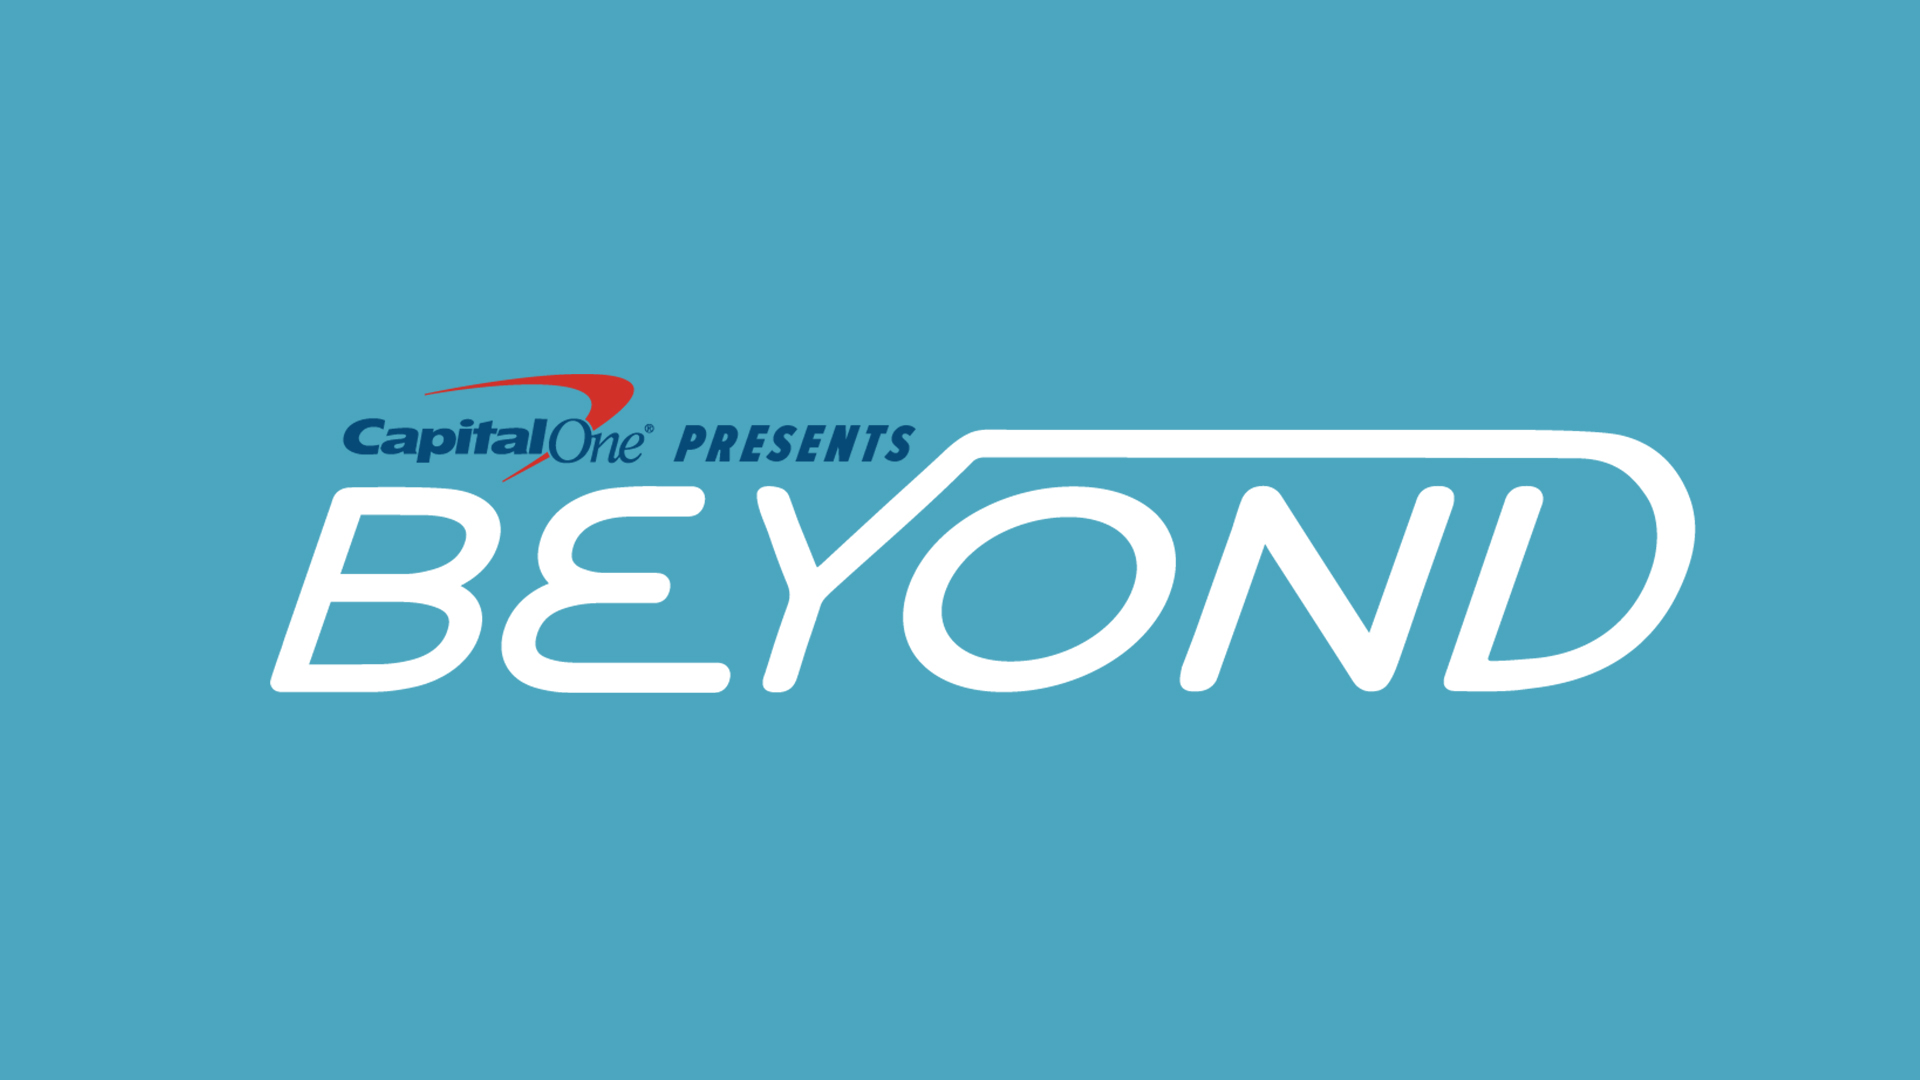 Calvin Carter and Chris Viscito are set to speak at upcoming Capital One Beyond Summit